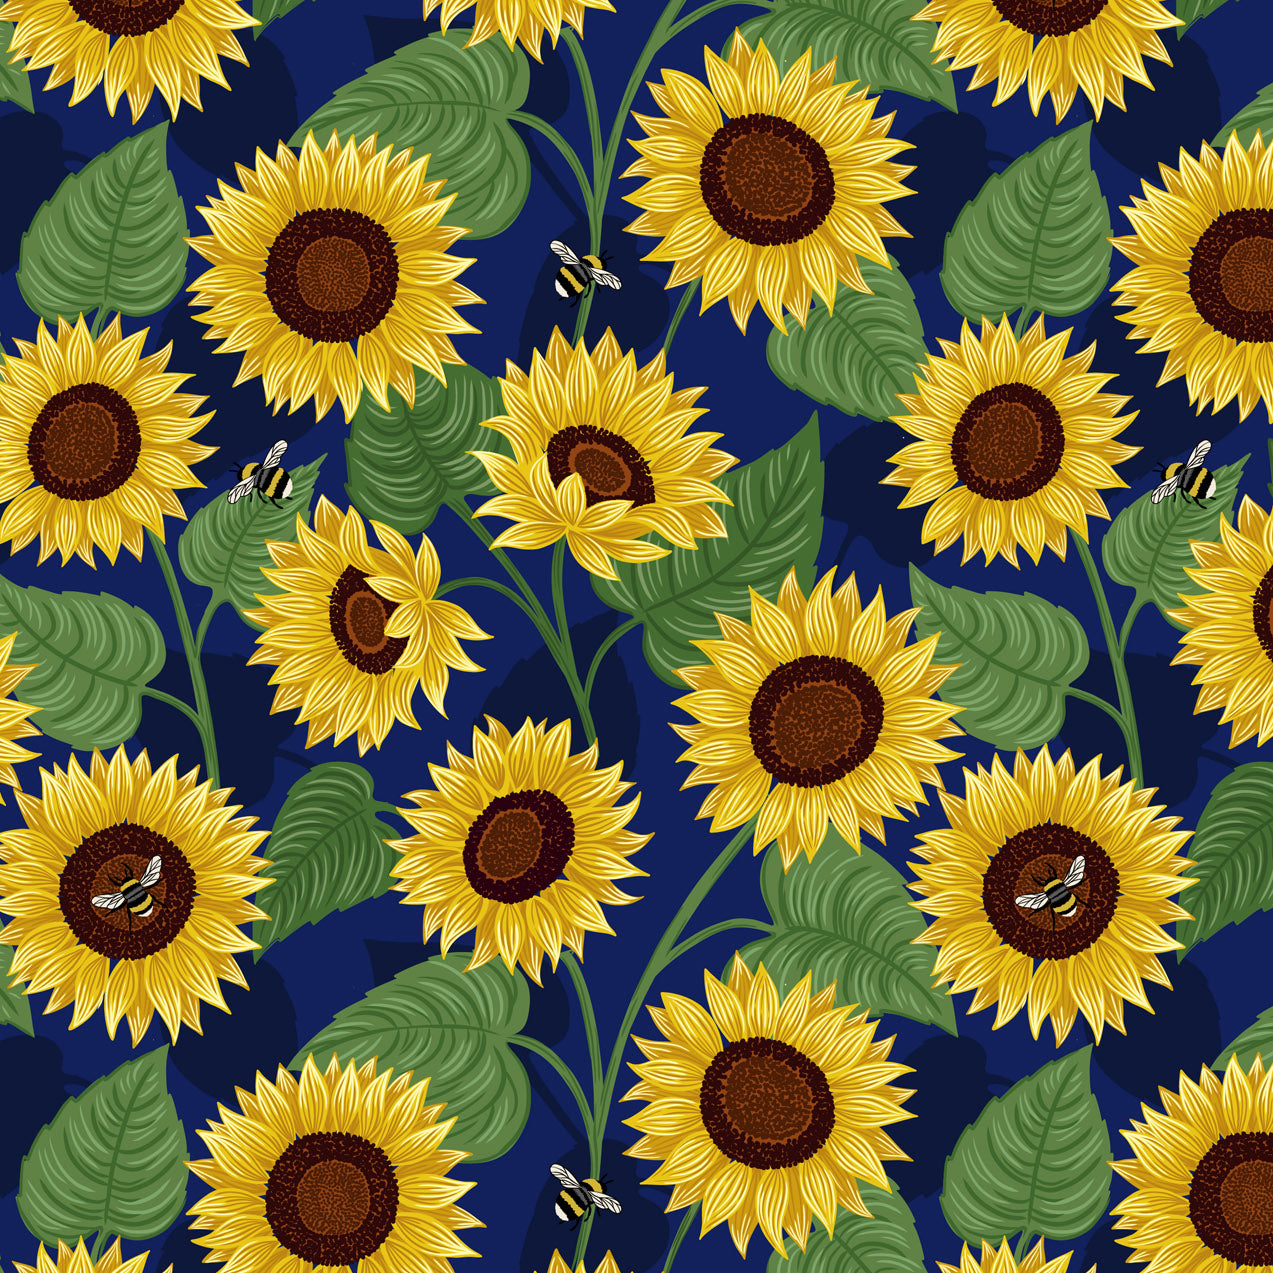 Lewis & Irene - Sunflowers Fabric Collection